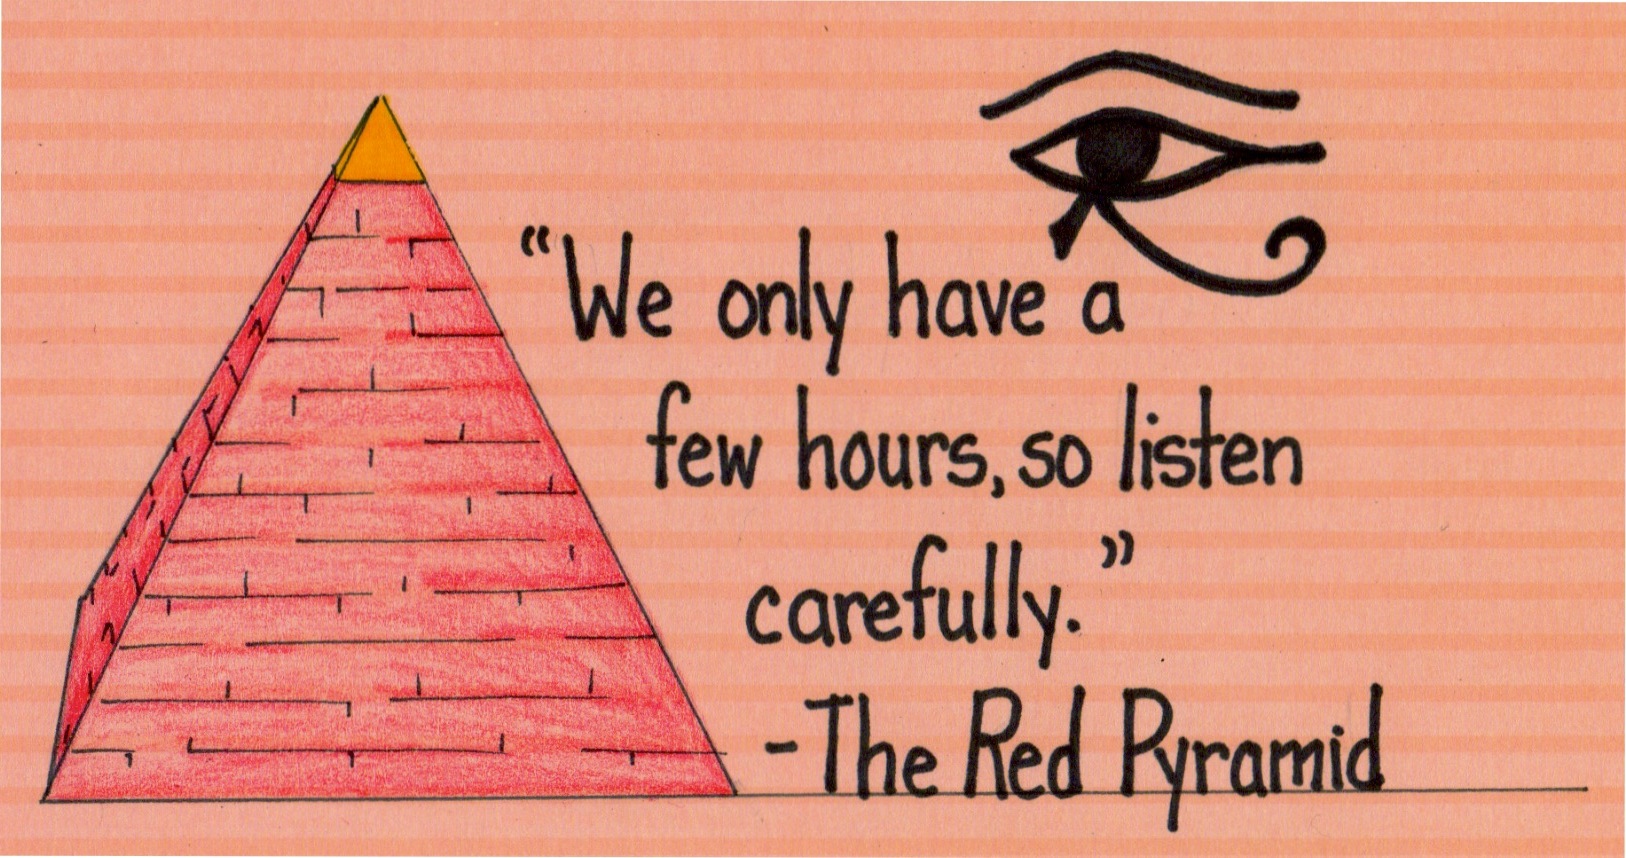 The red pyramid book report